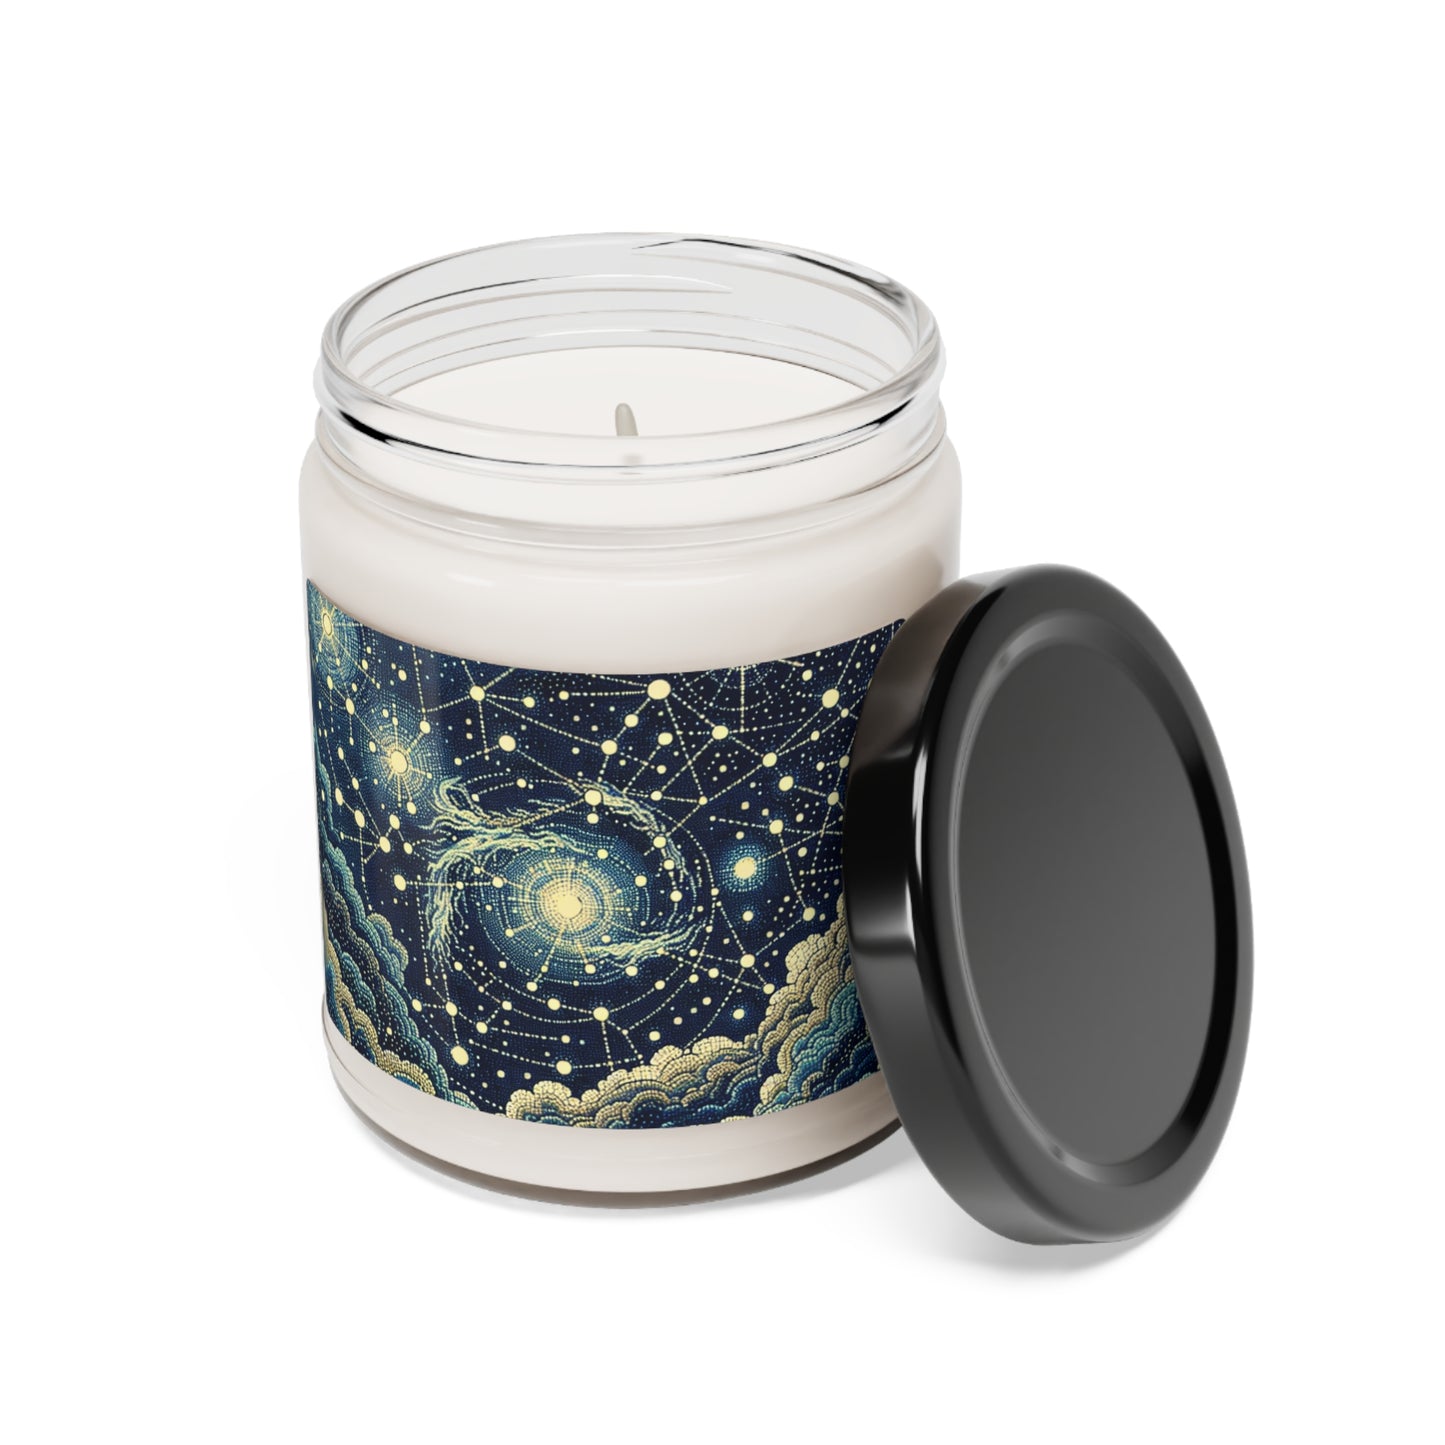 "Dotting the Heavens" - The Alien Scented Soy Candle 9oz Pointillism Style